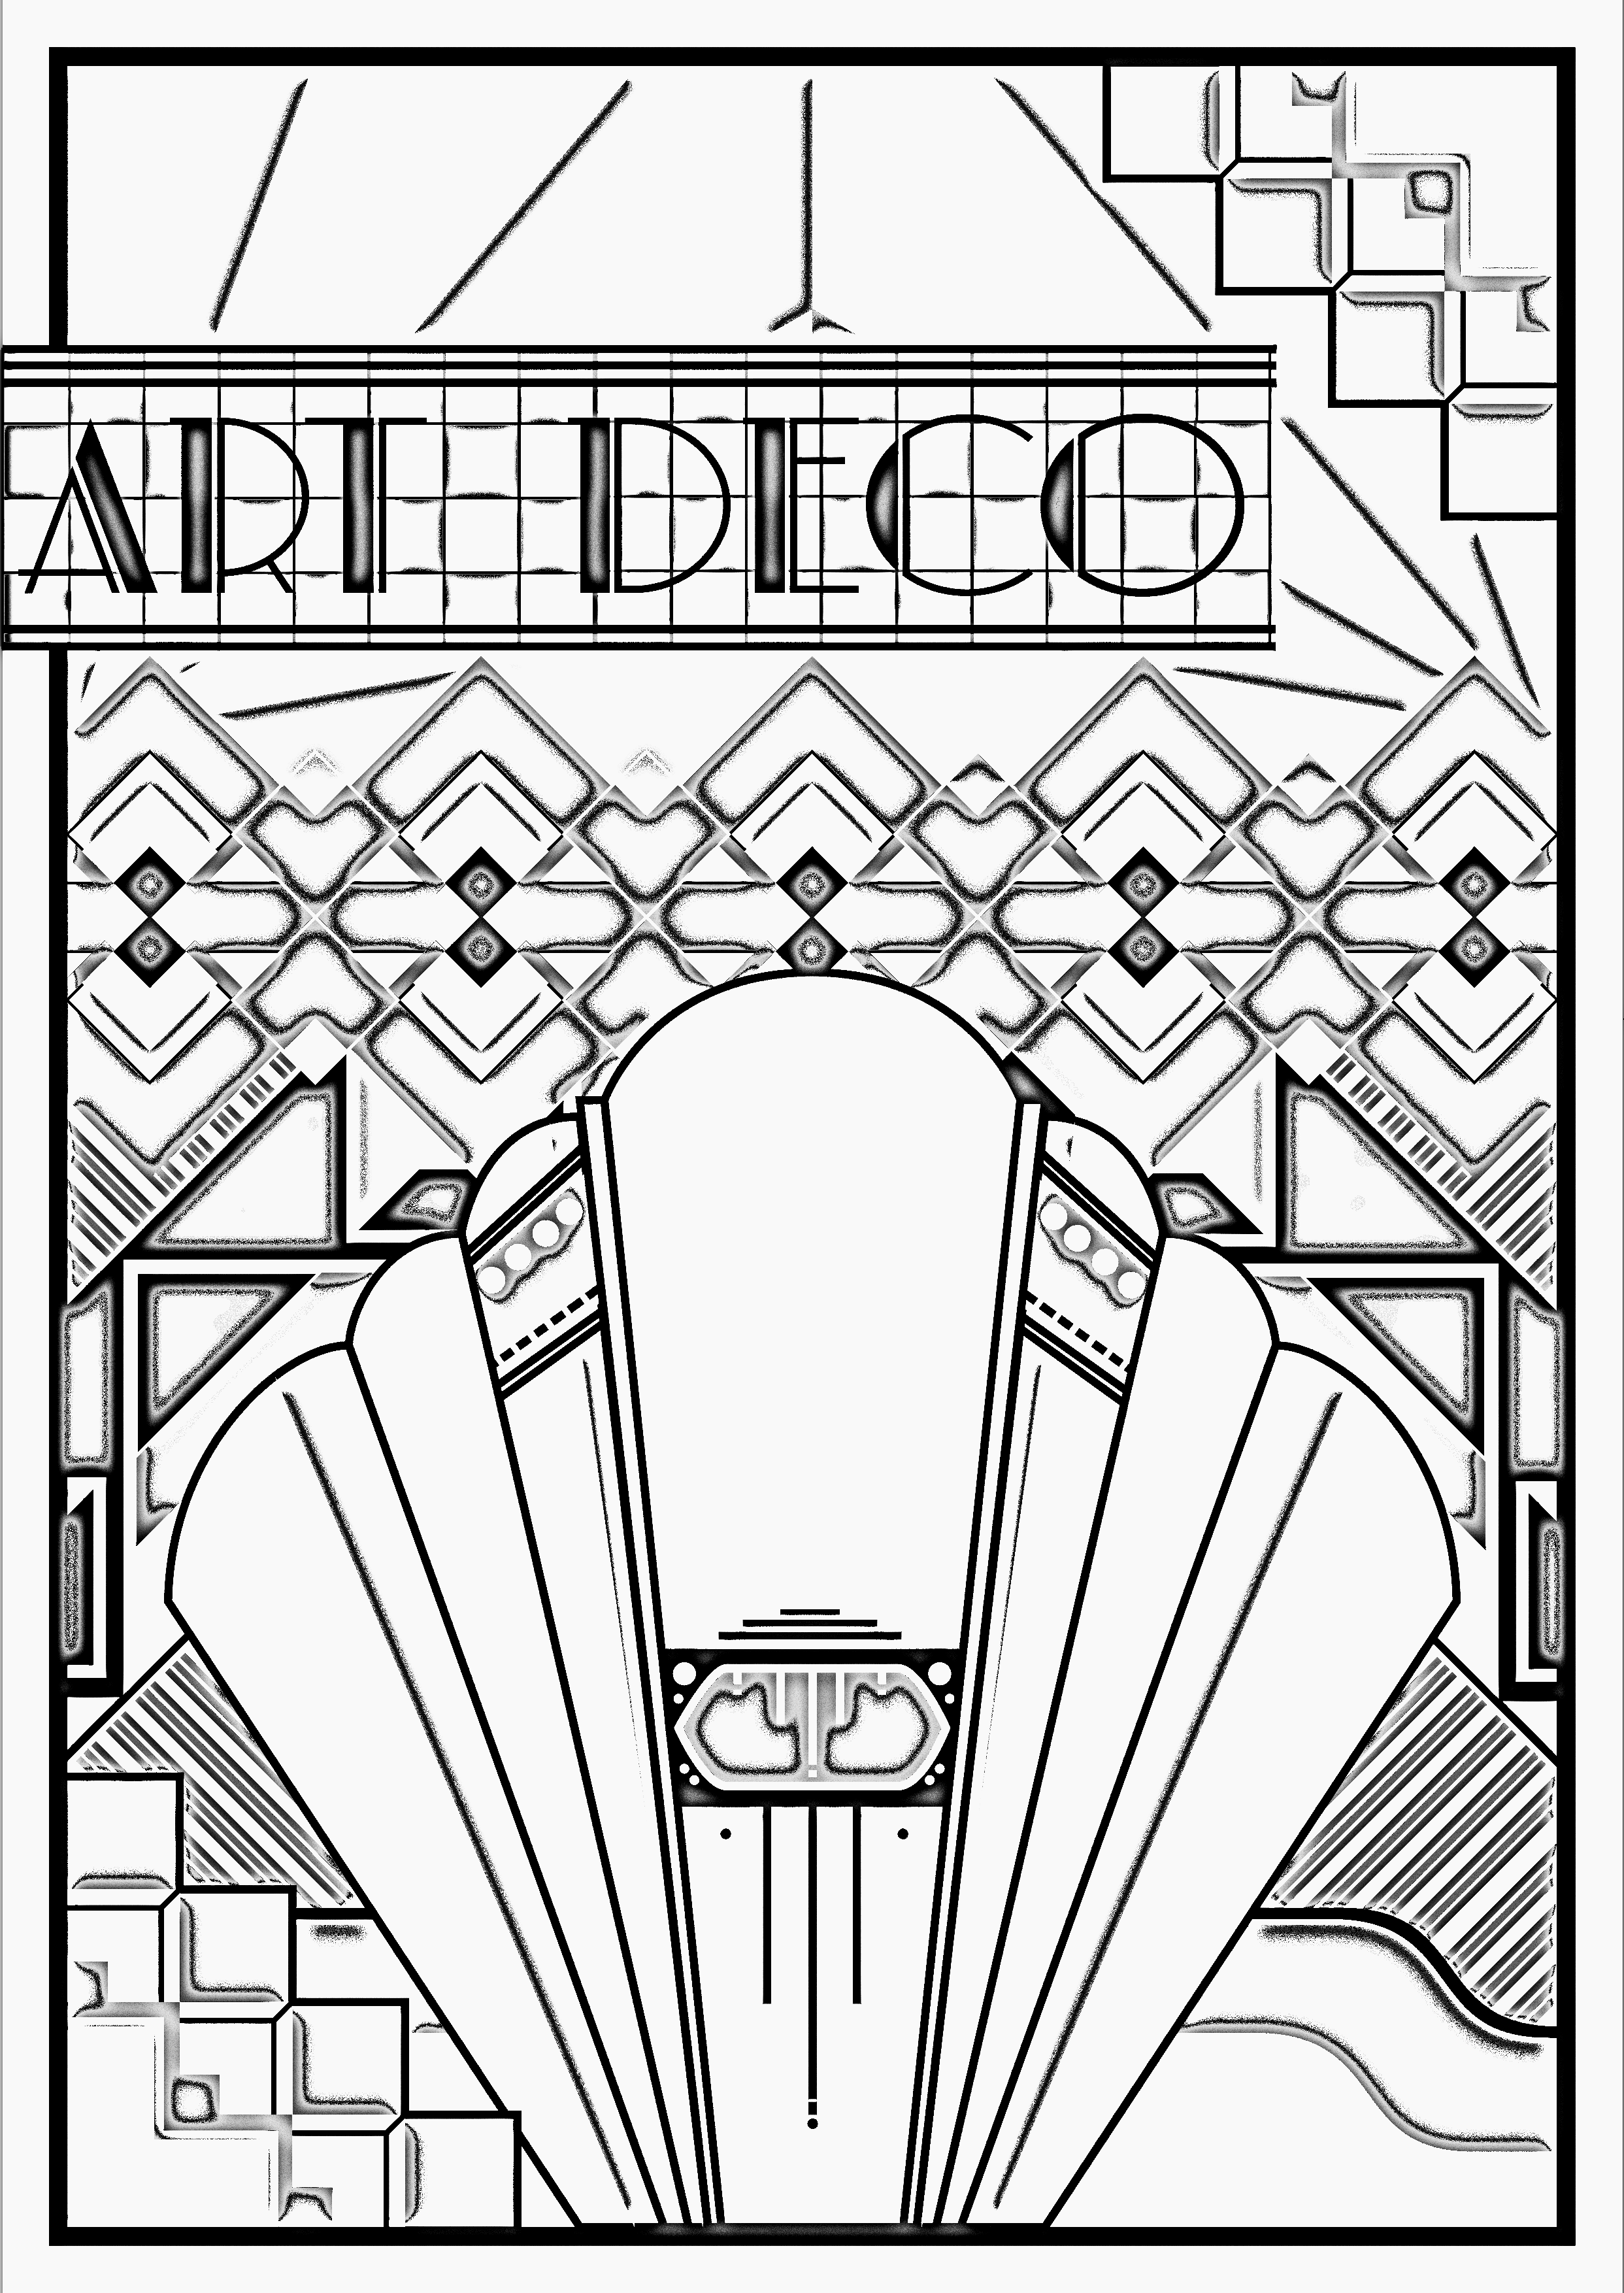 Art deco" - Coloring Pages for adults : coloring-adult-art-deco-poster